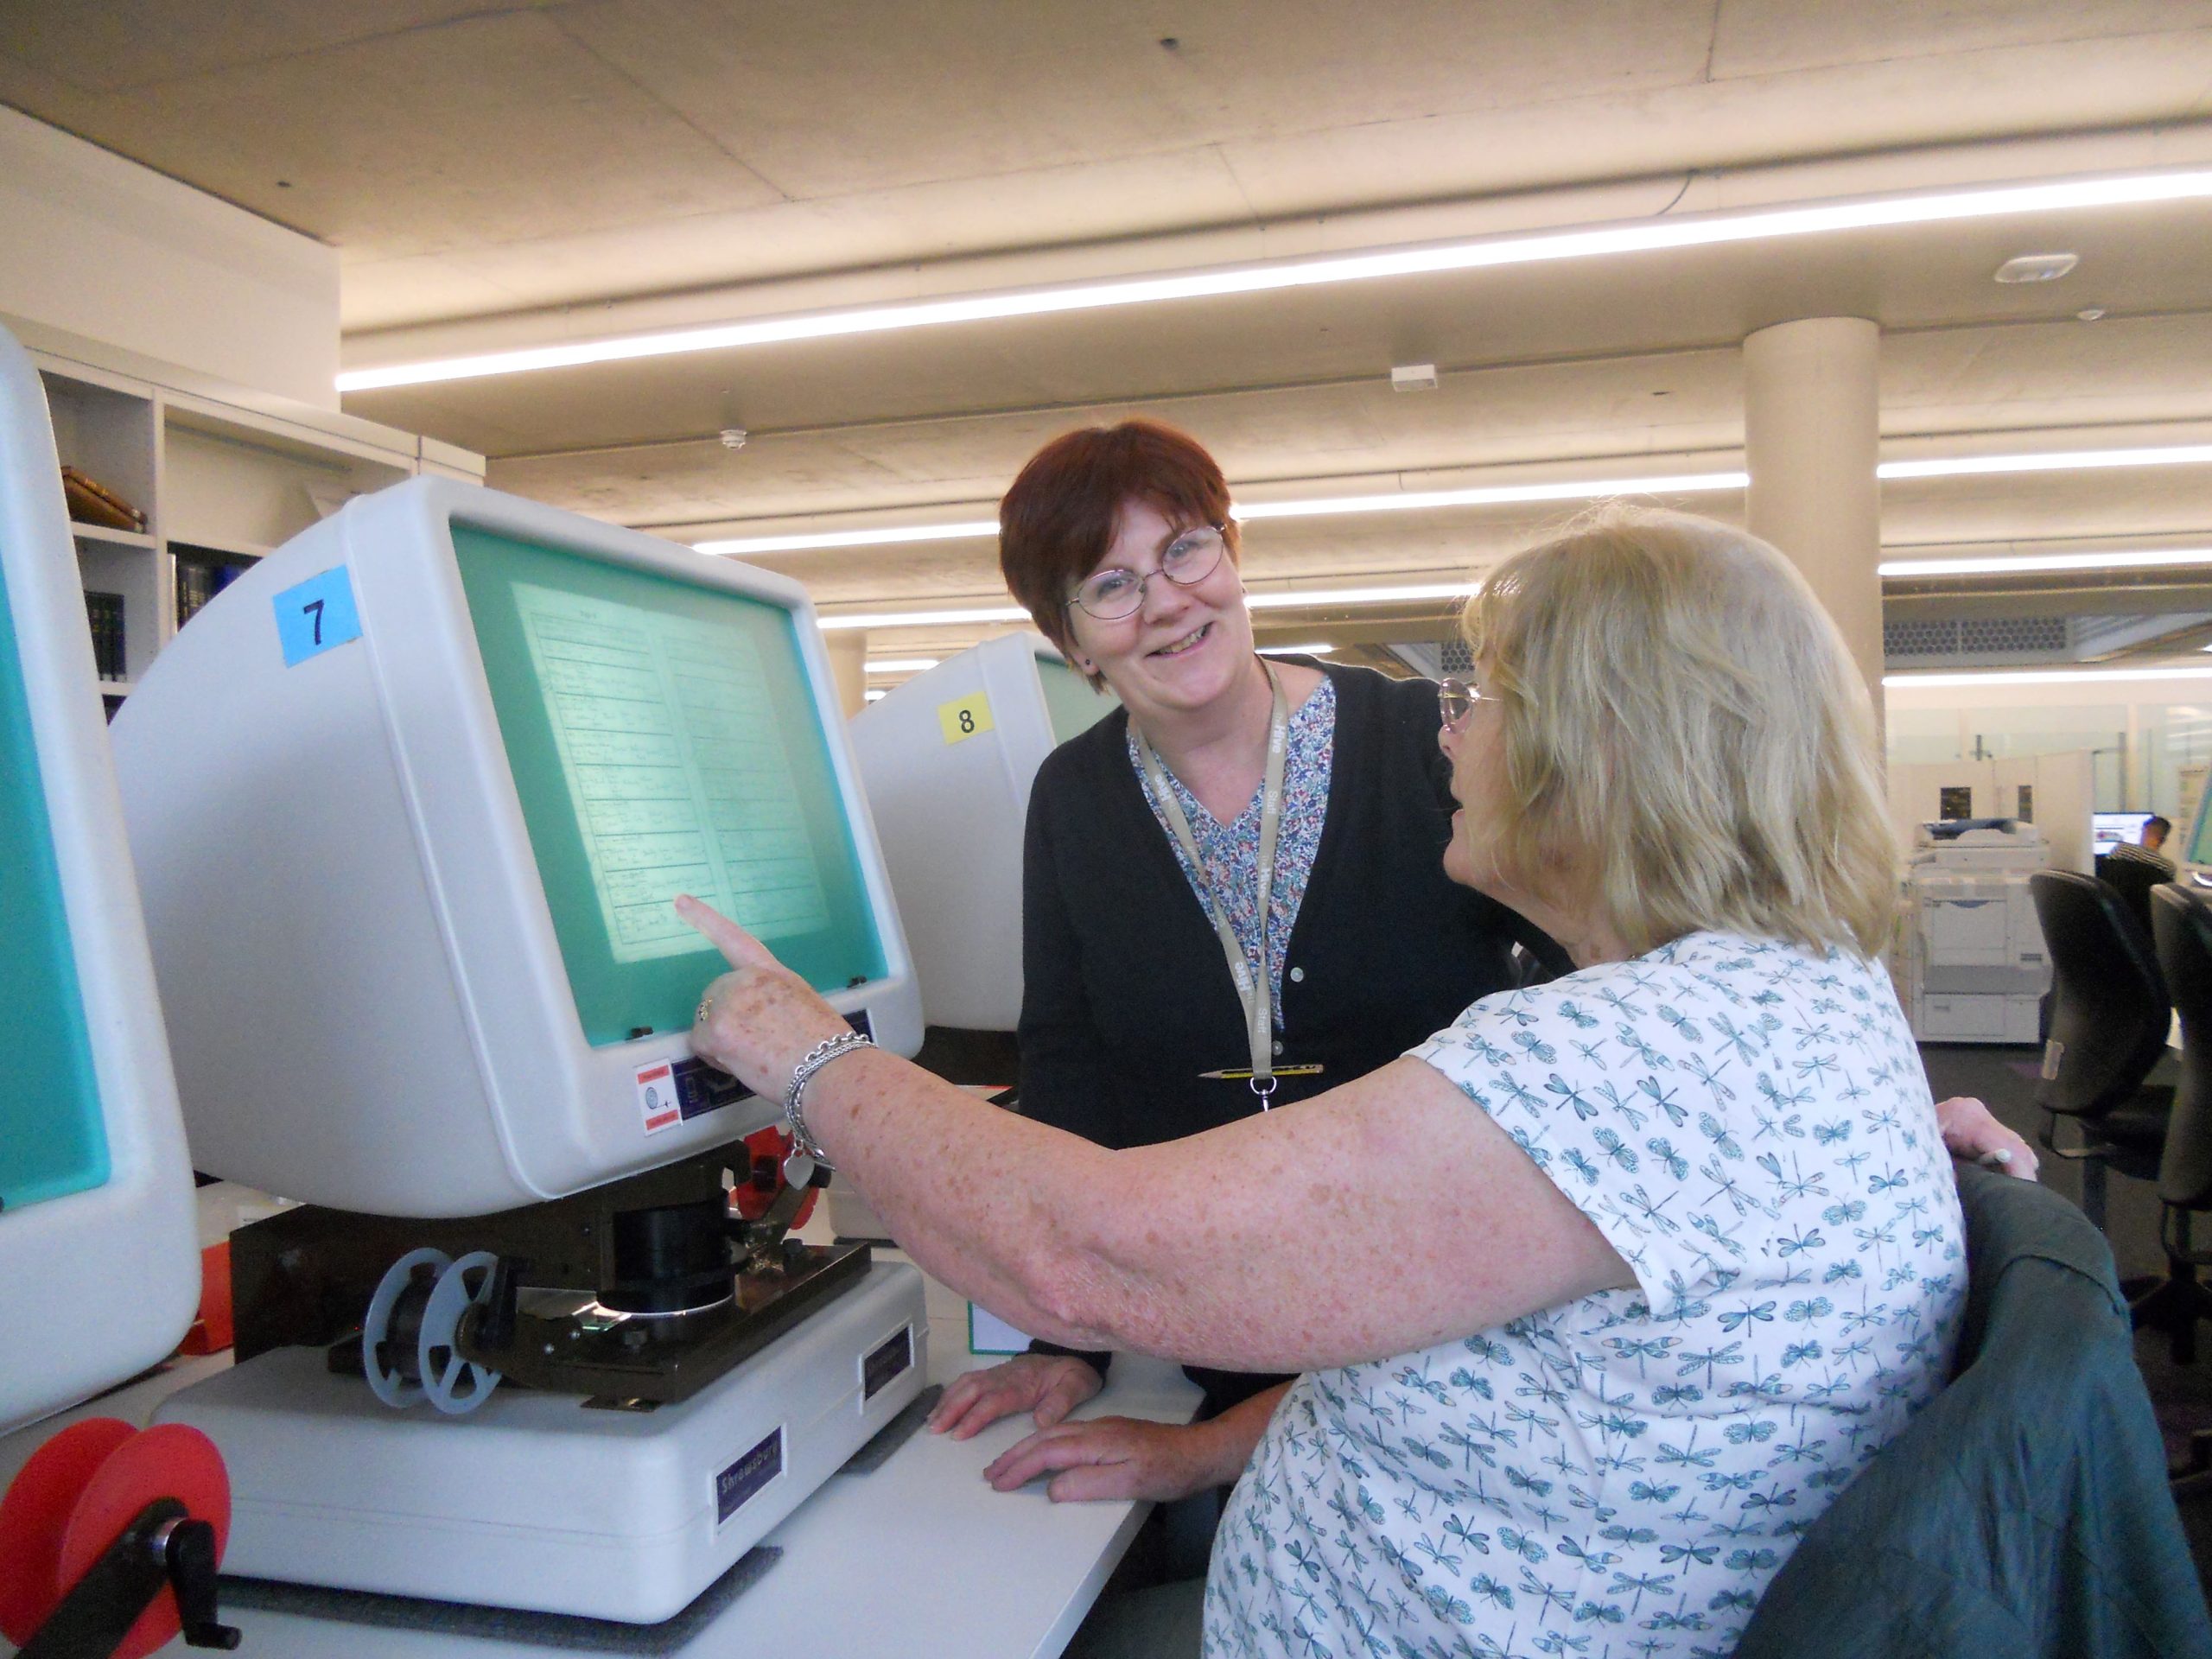 Colour photograph showing a member of staff helping a customer consult a microfilm on a reader.